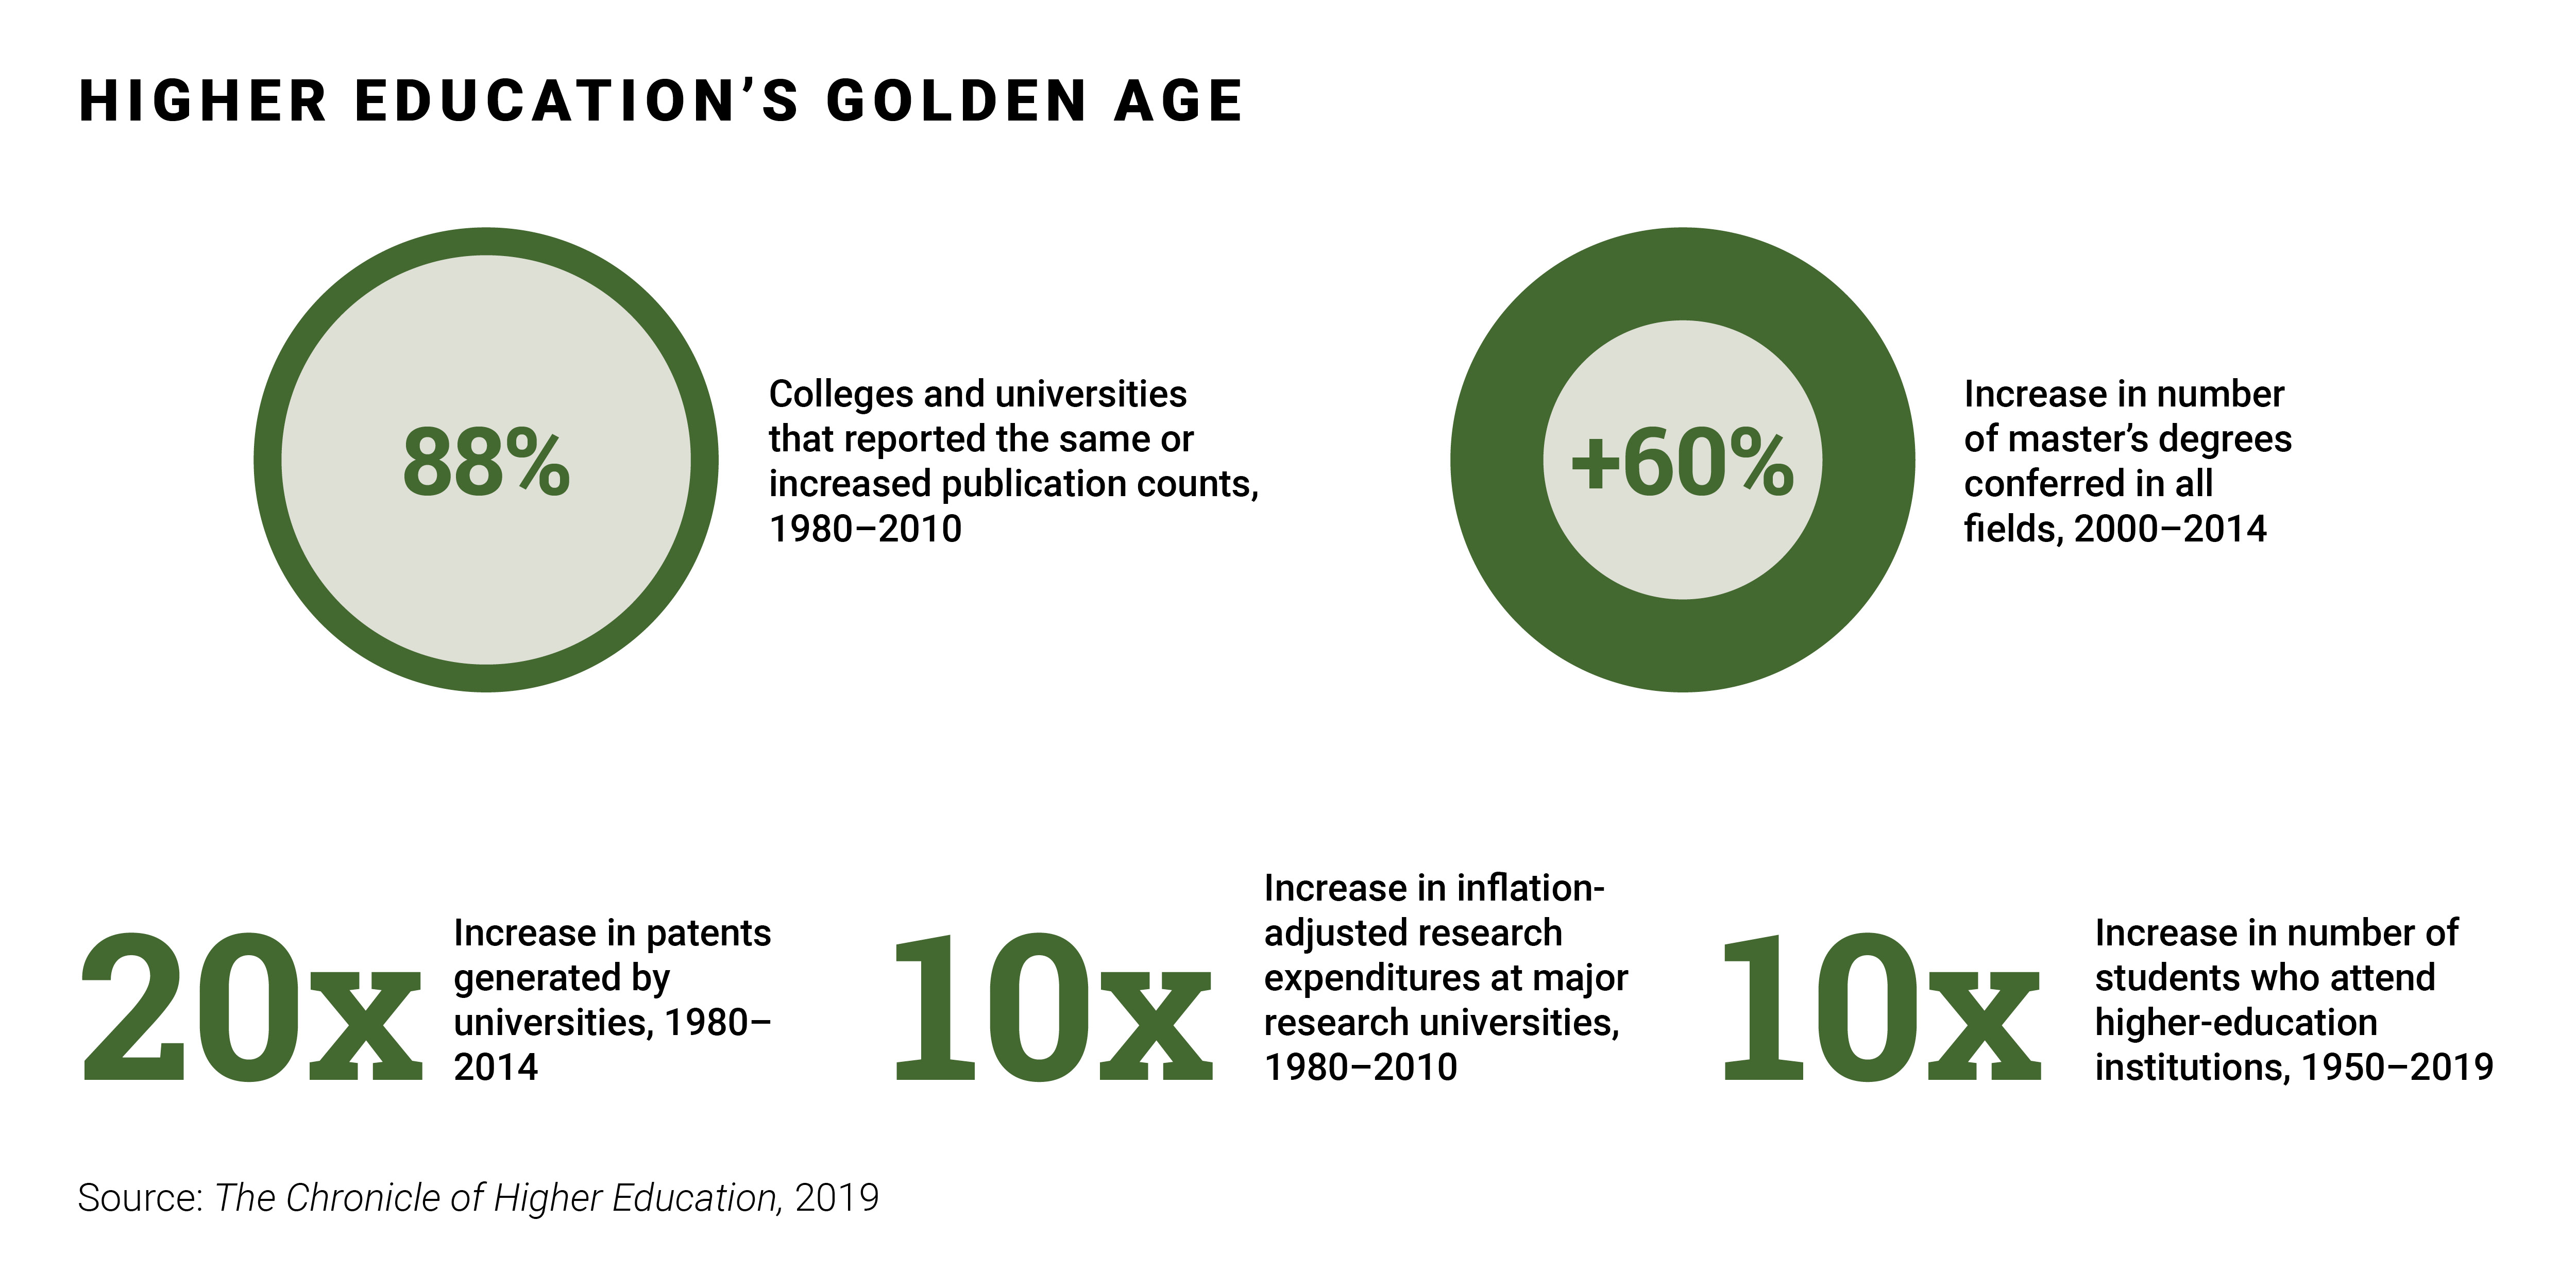 Higher Education's Golden Age